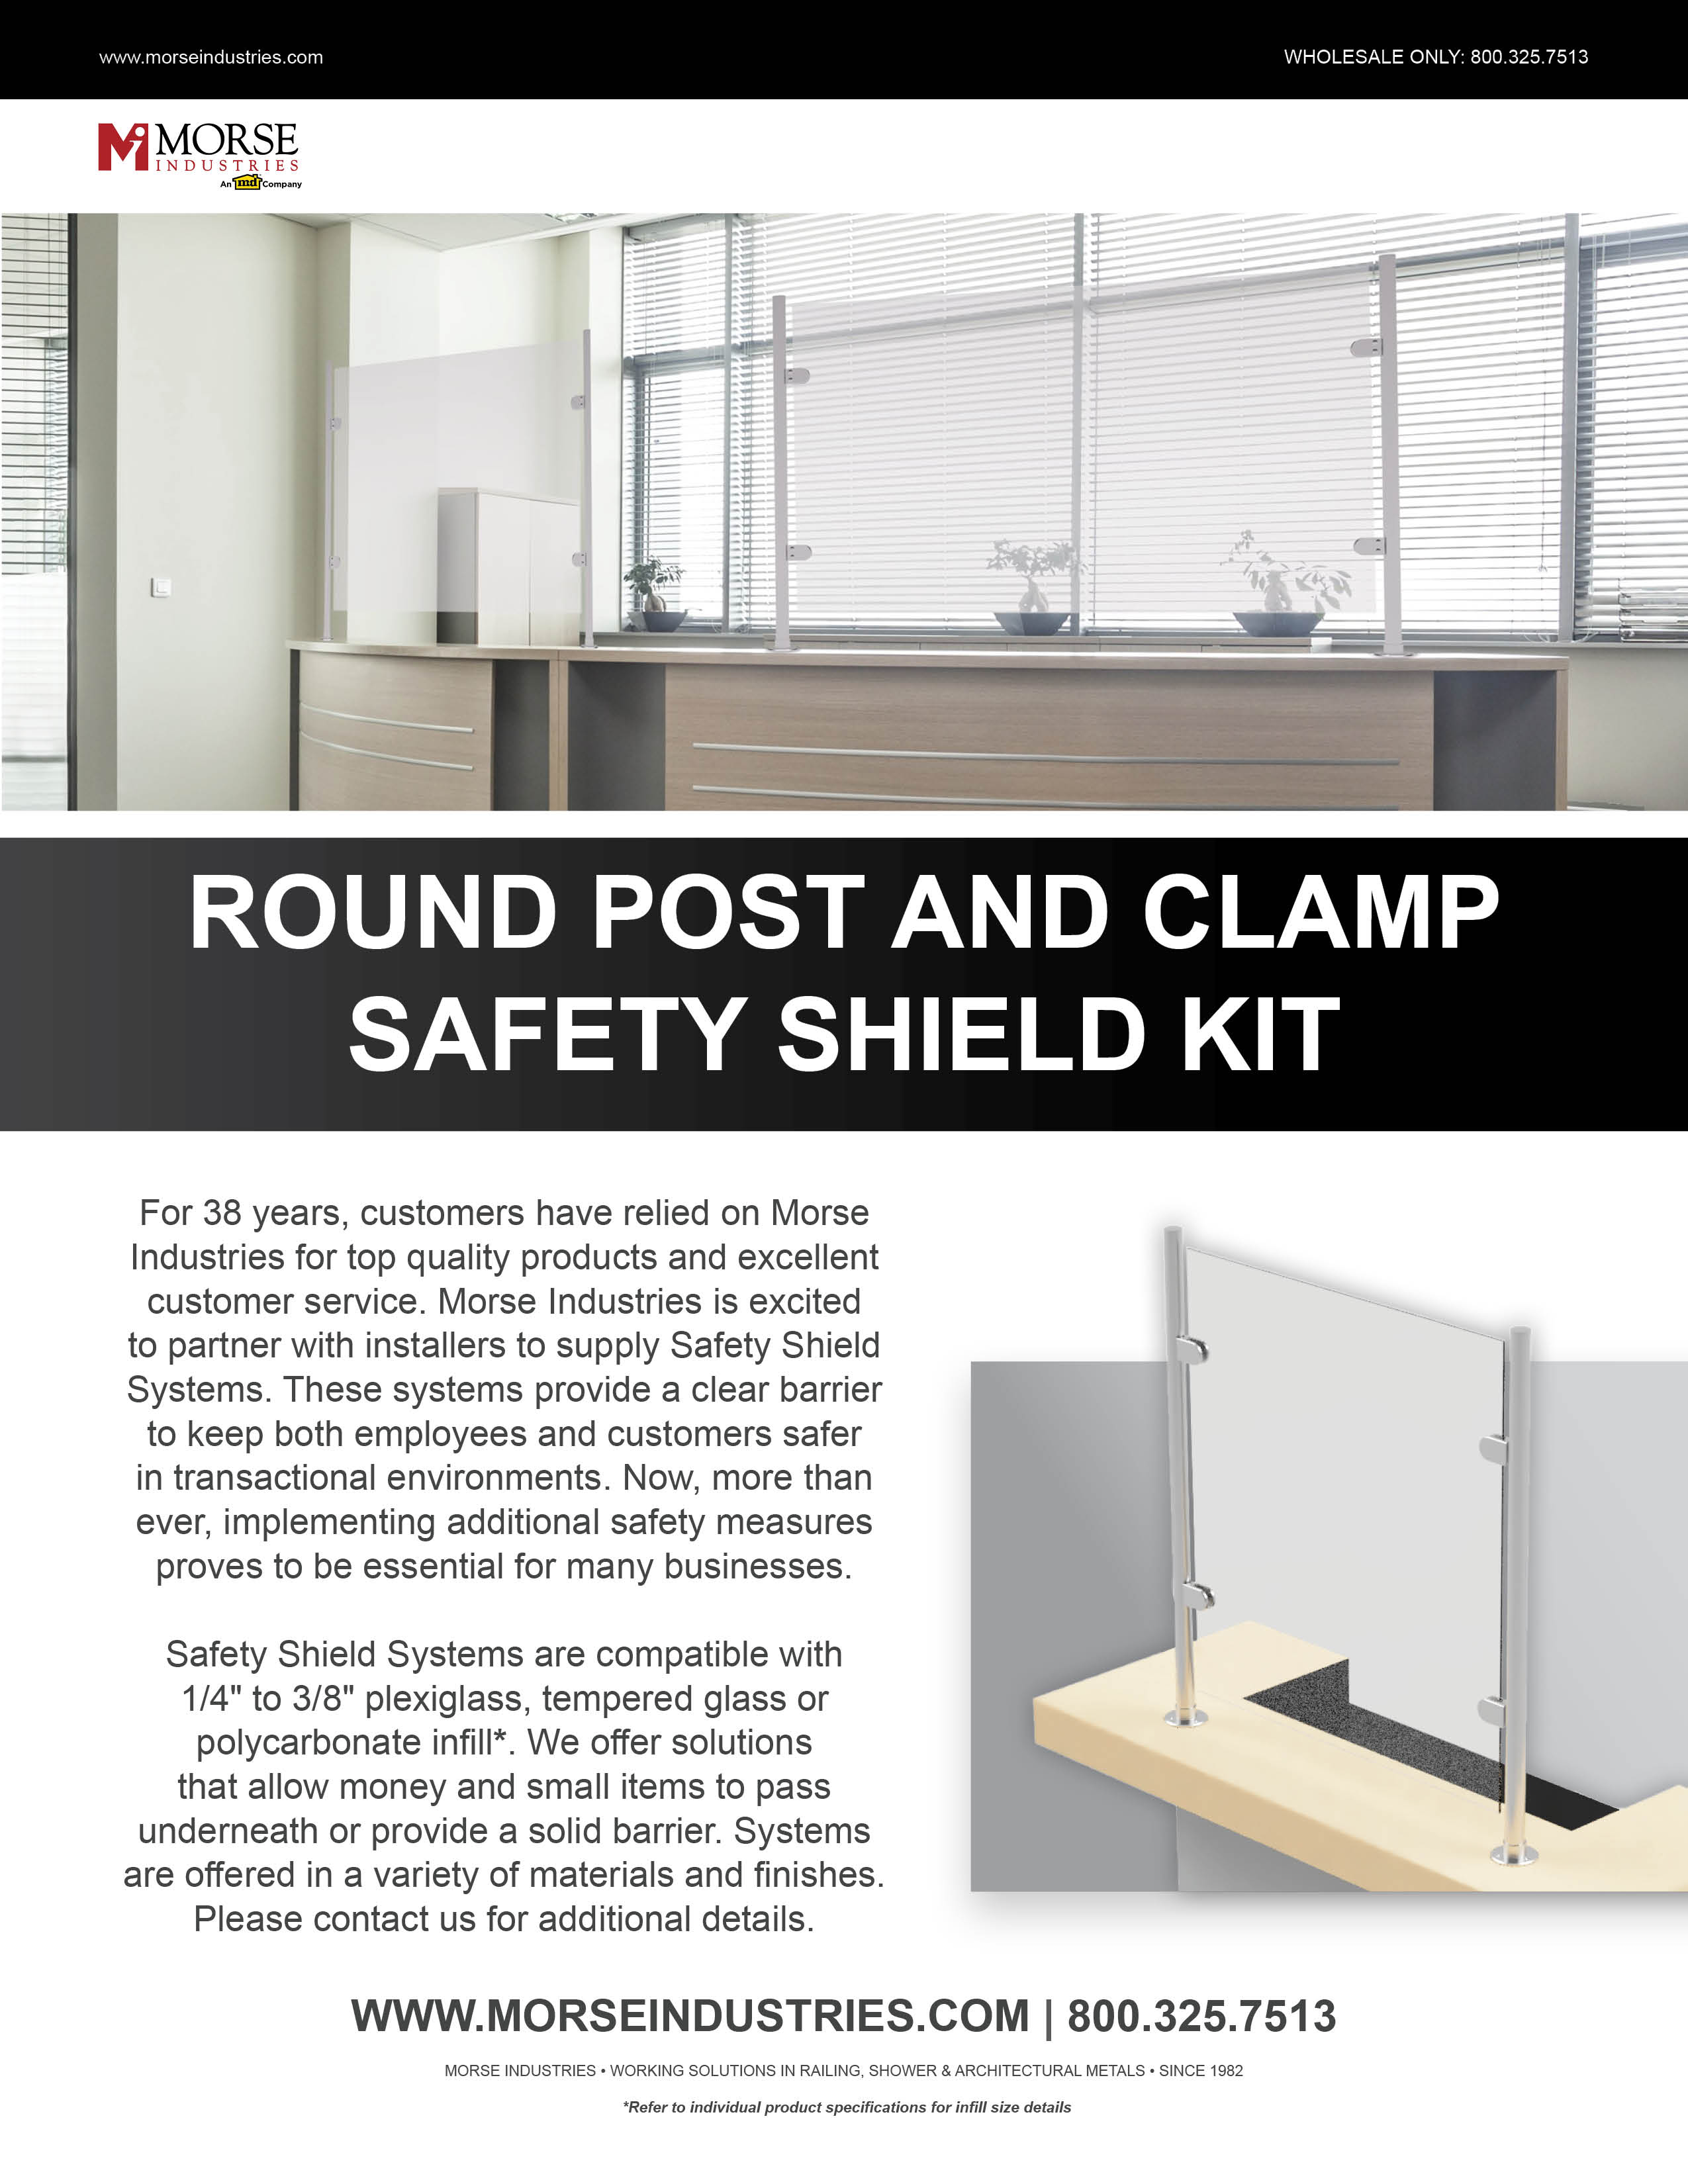 Round Post and Clamp Safety Shield